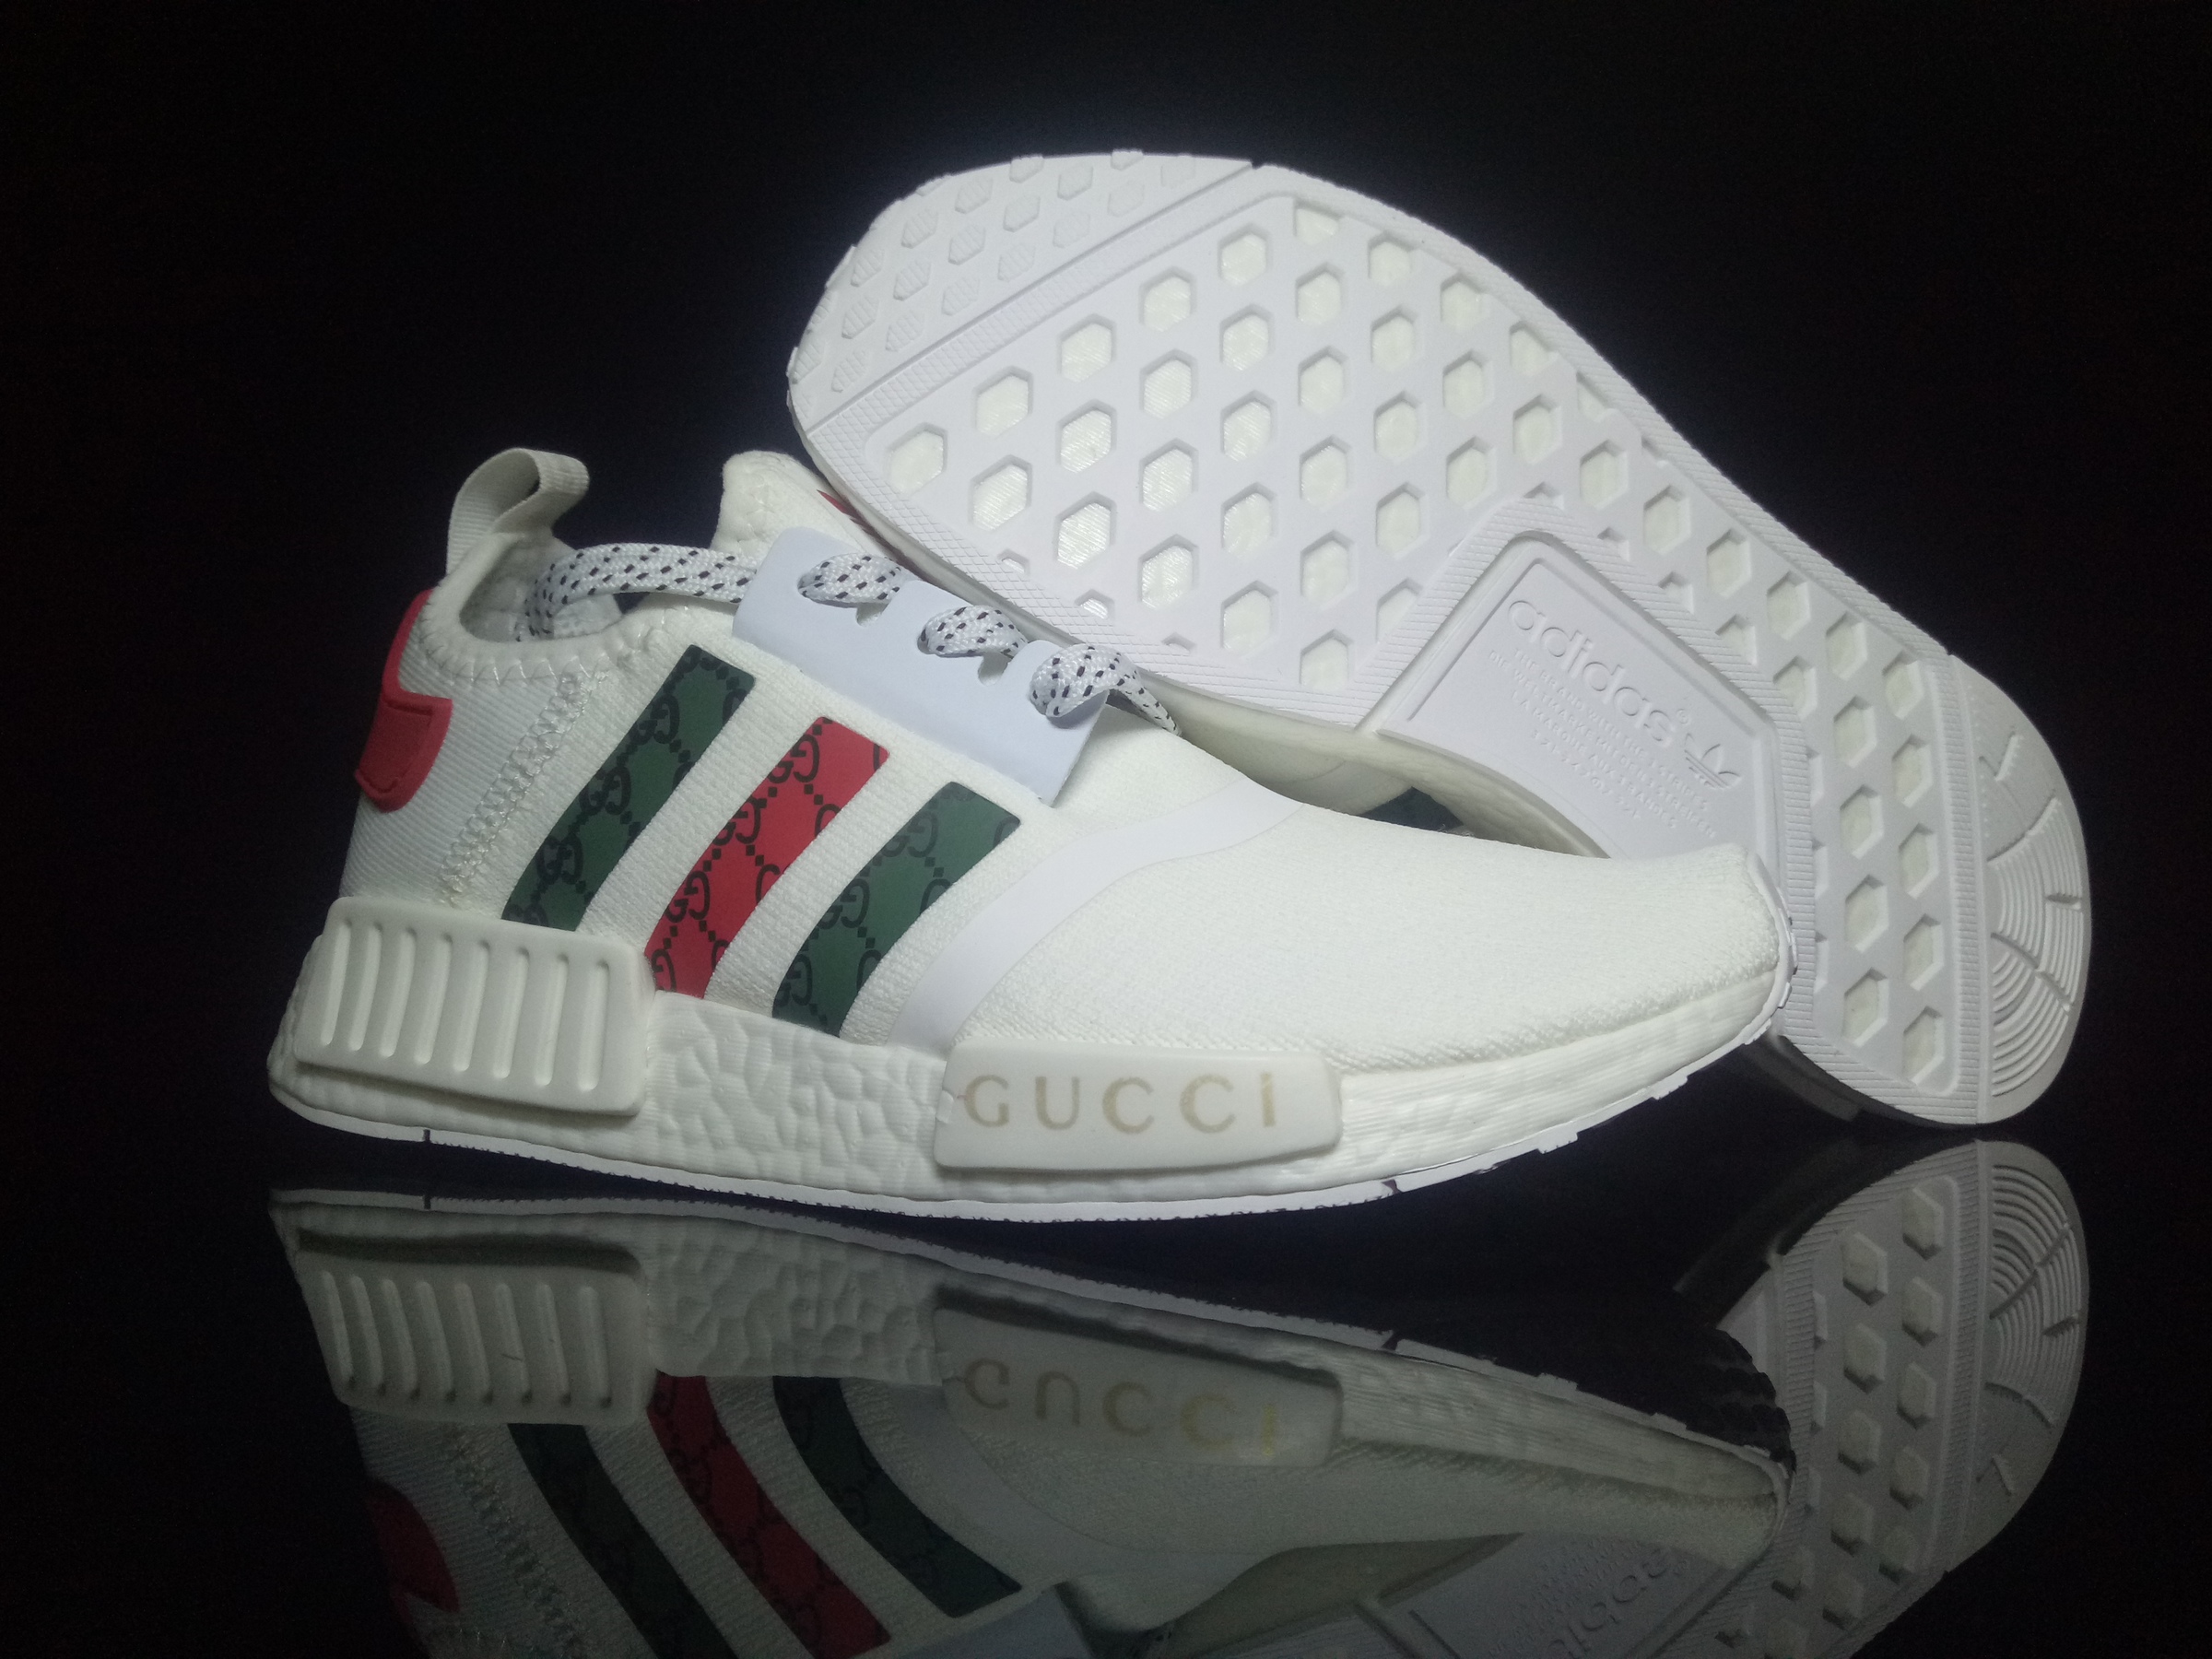 Gucci x Adidas NMD Knit White – Sally House of Fashion | Buy Your